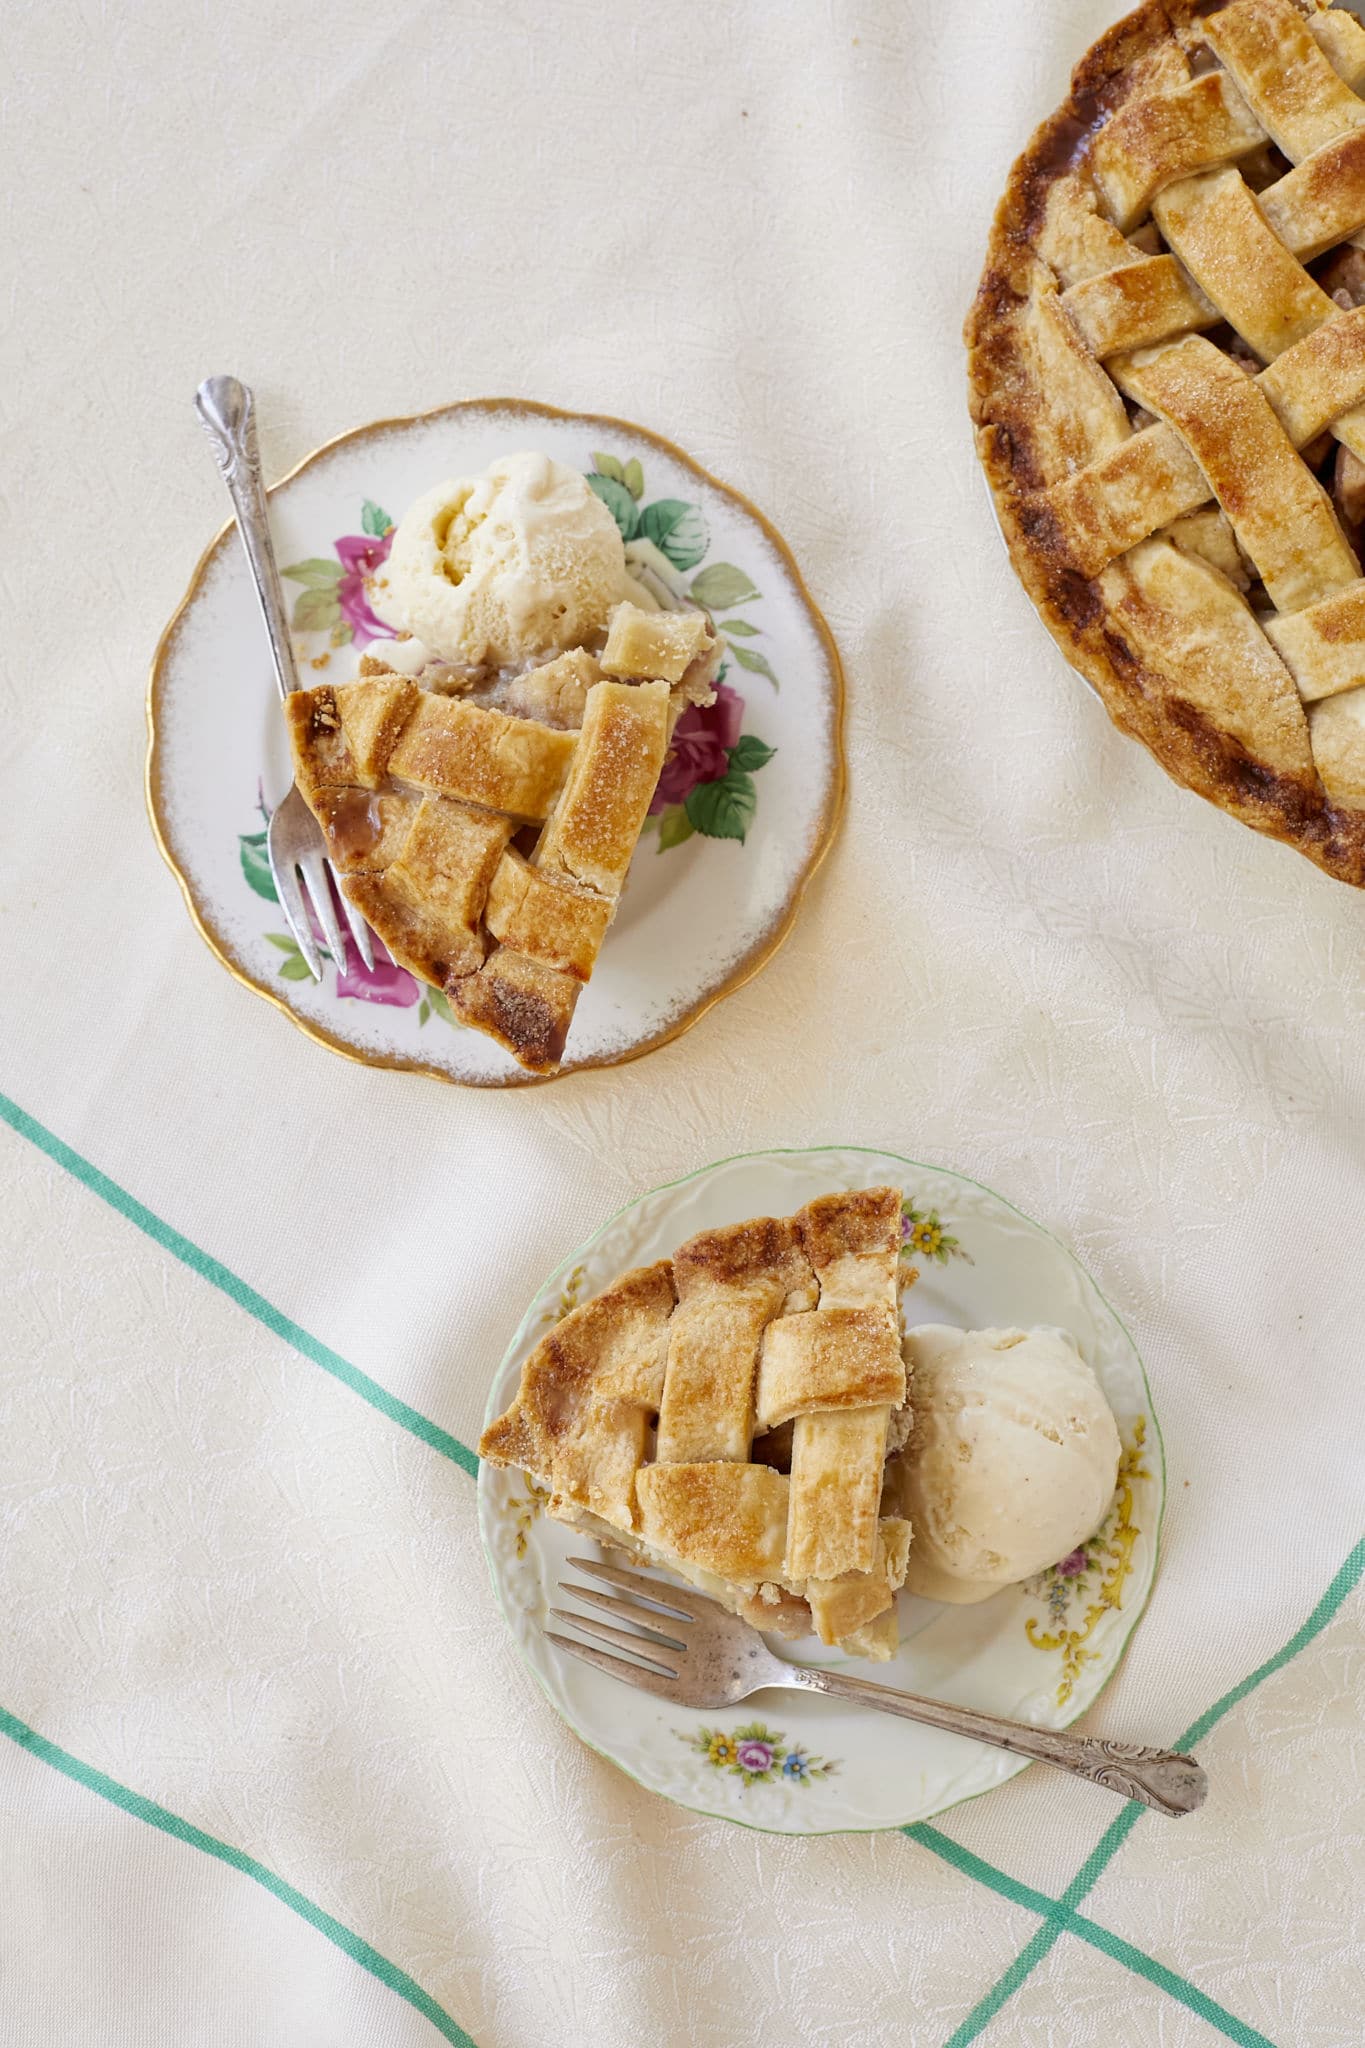 Two slices of pear pie are served with vanilla ice cream on a white table cloth.